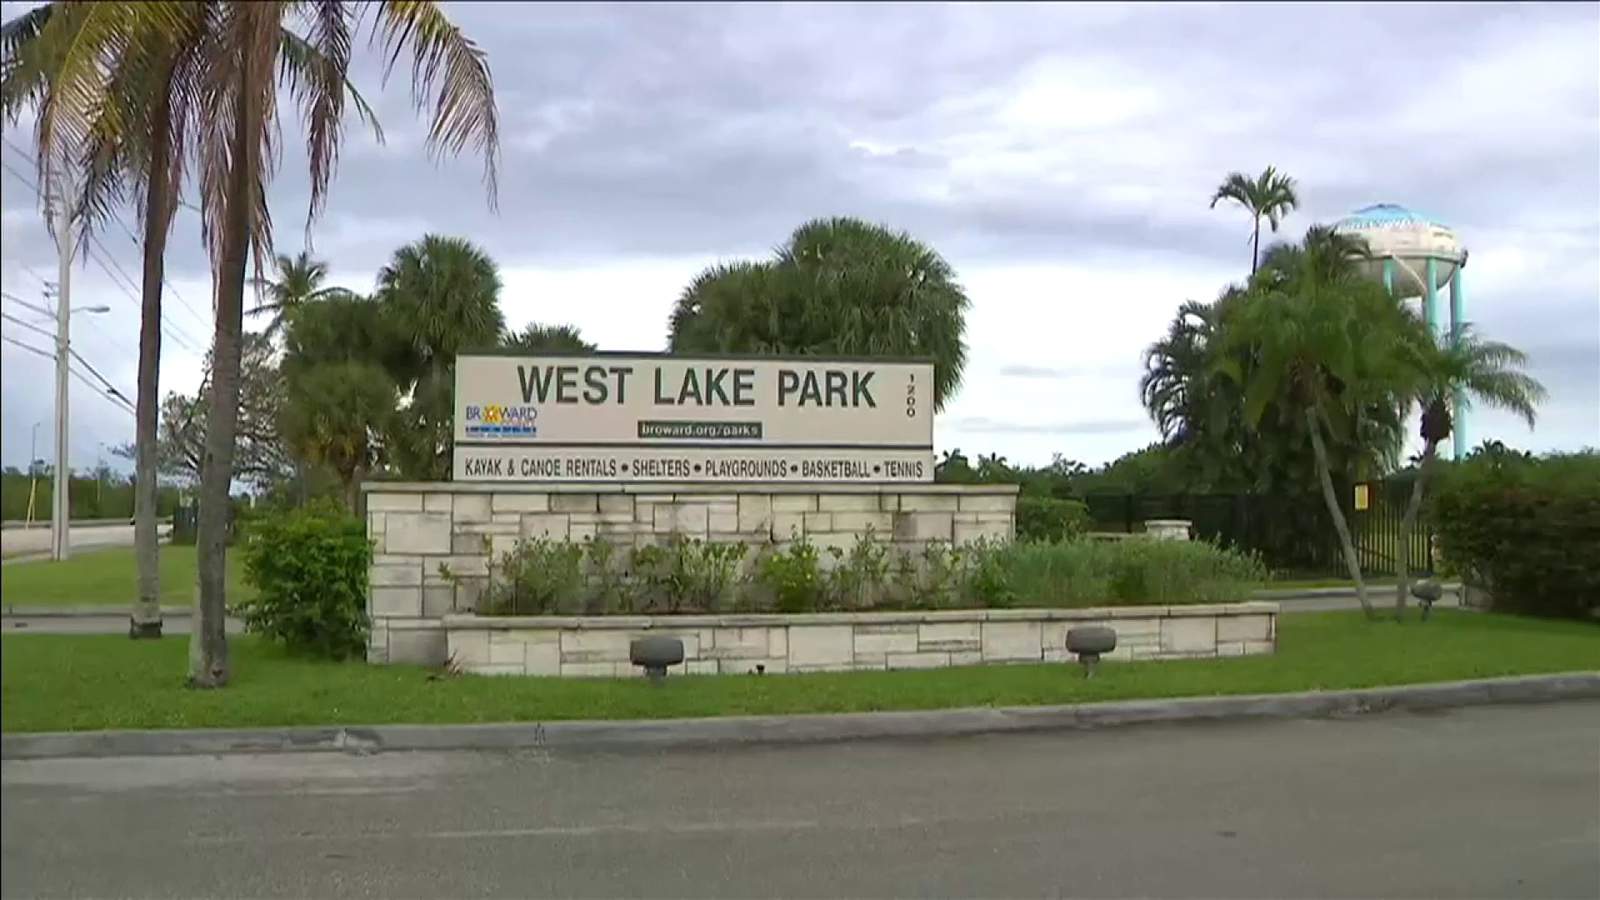 Looks like West Lake Park residents will have 32-story emergency tower in their midst